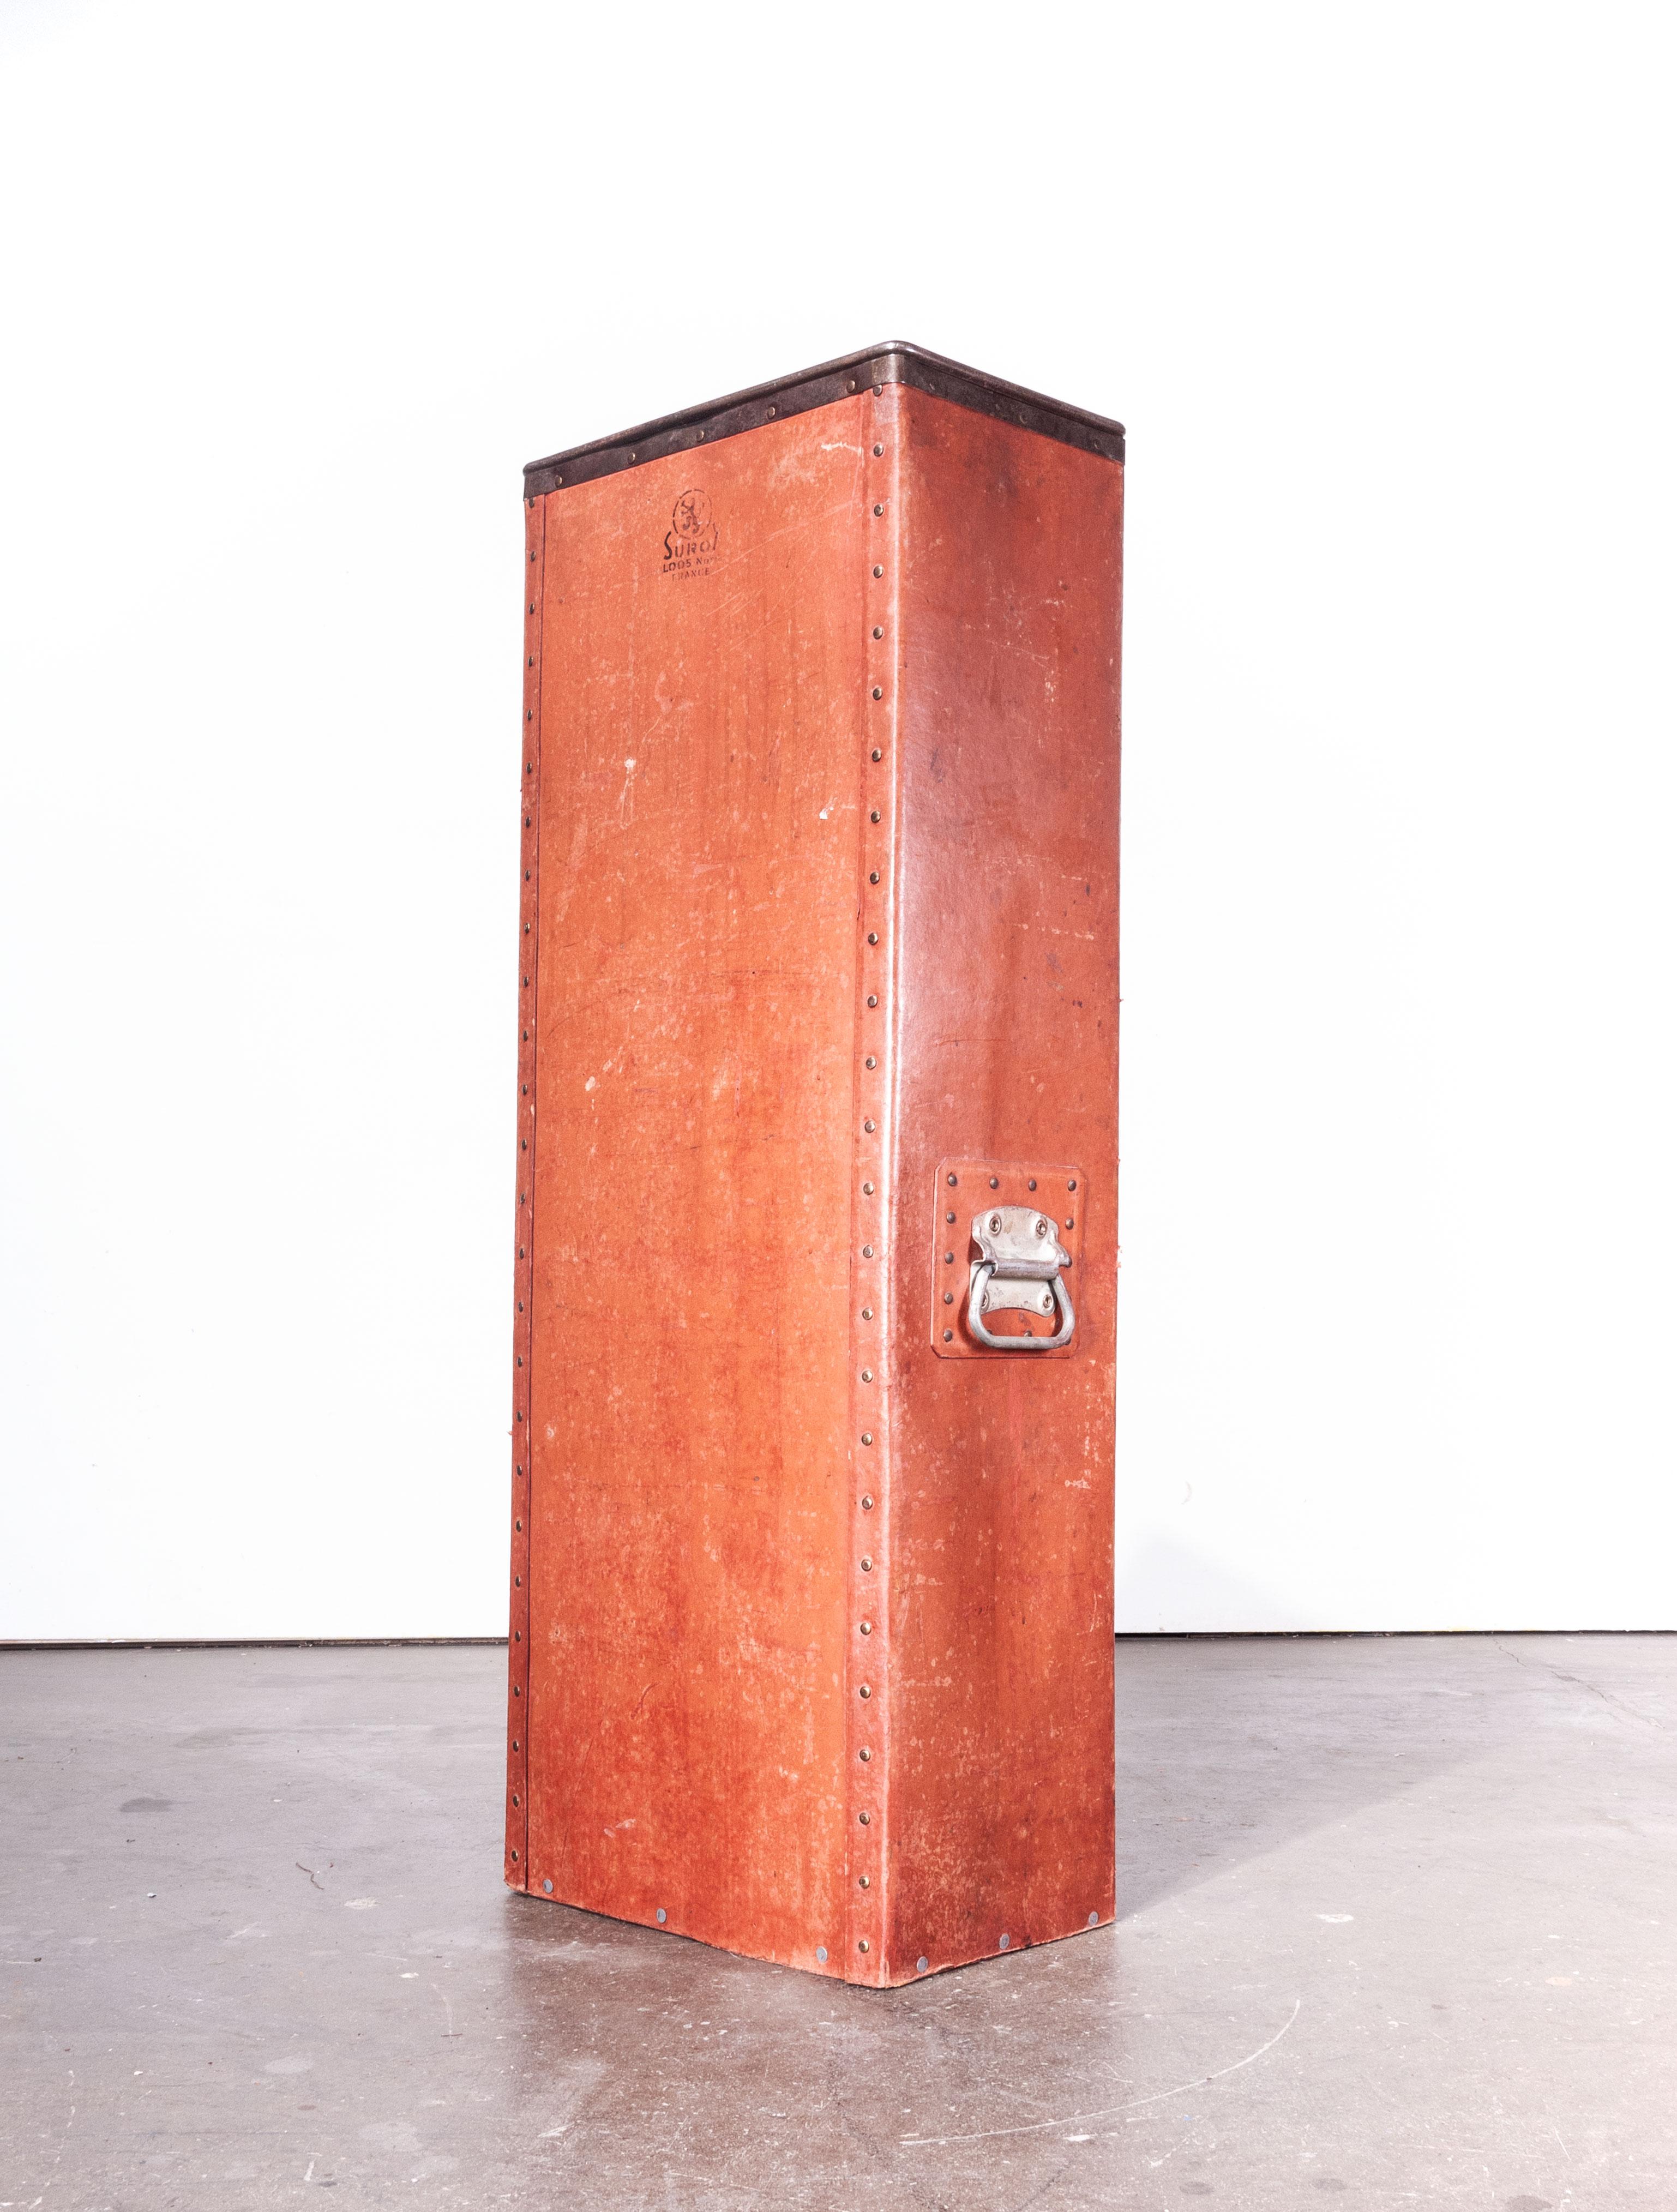 1930s original Suroy very tall industrial storage box, with grab handles
1930s original Suroy very tall industrial storage boxes. In 1853 the textile Industrial revolution arrived in Loos, Nord France with the formation of the Esquermes factory by